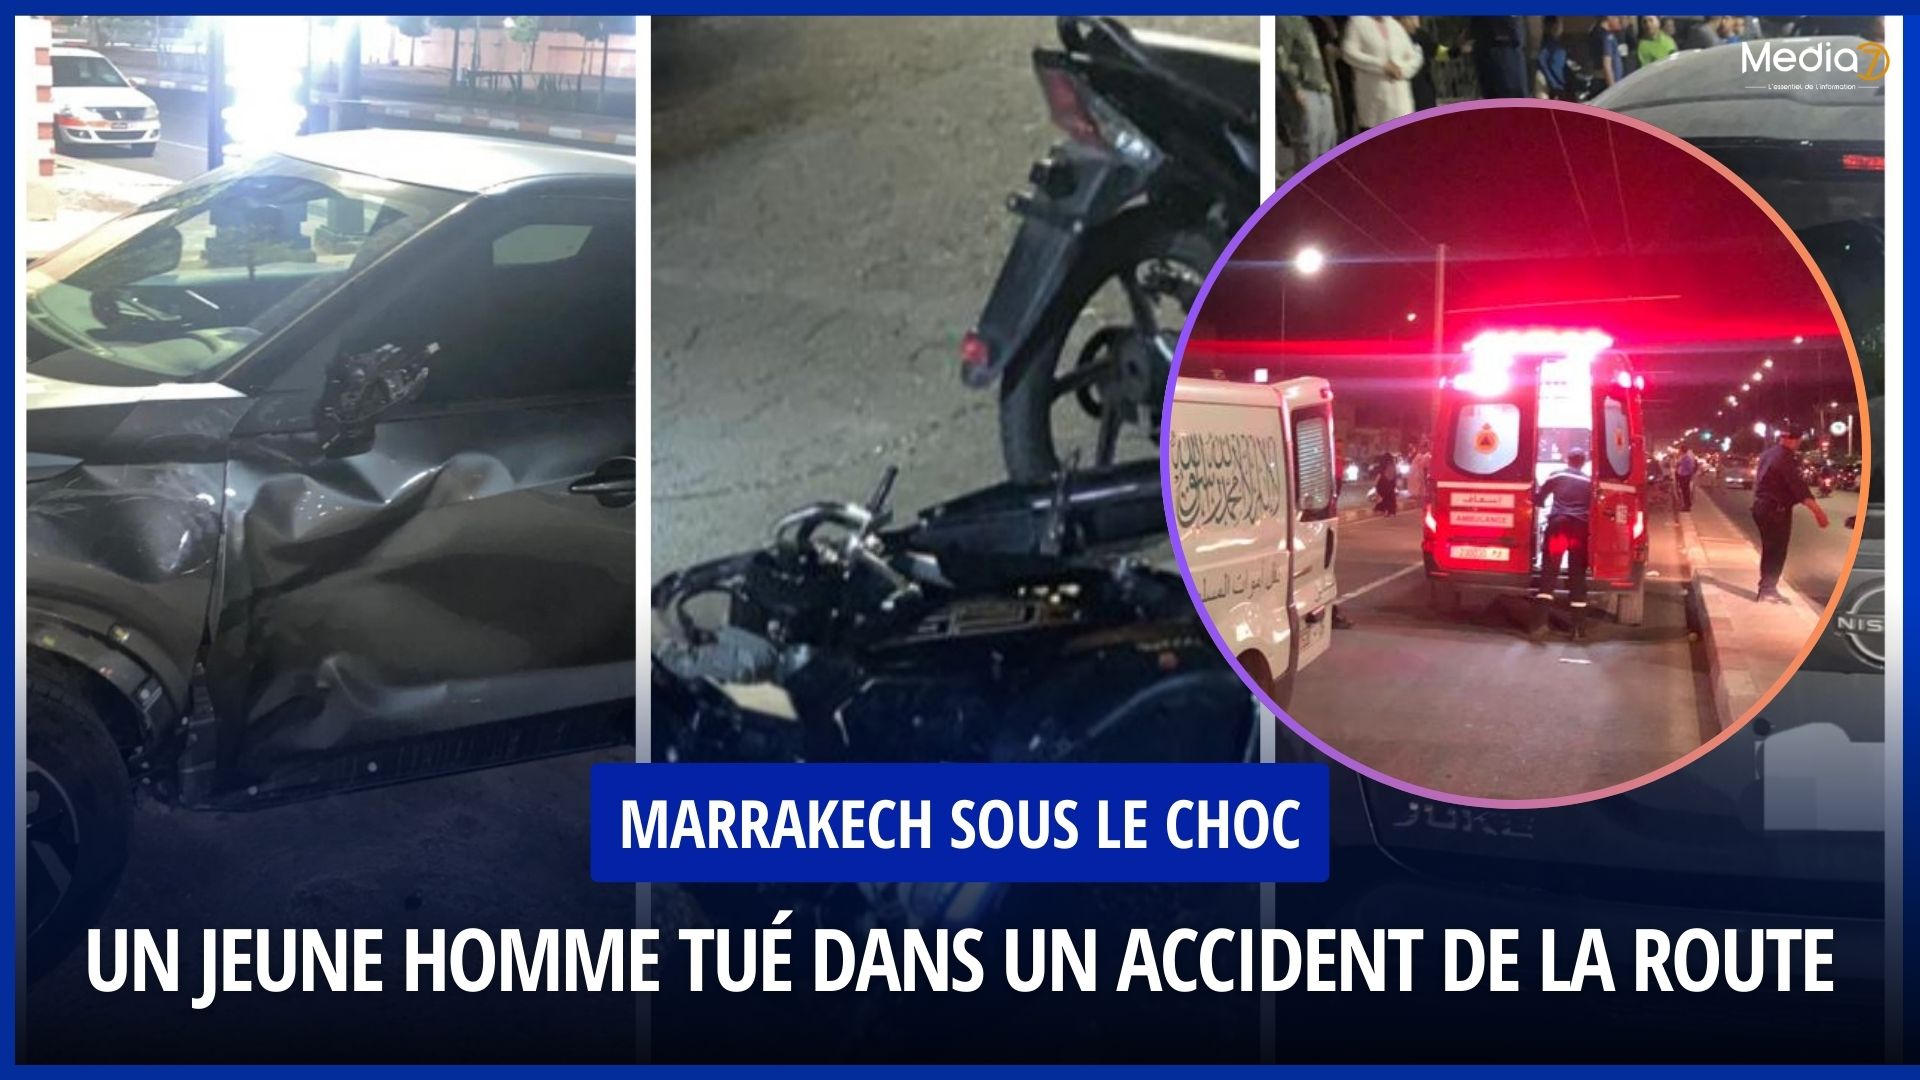 Marrakech in Shock: A Young Man Killed in a Road Accident